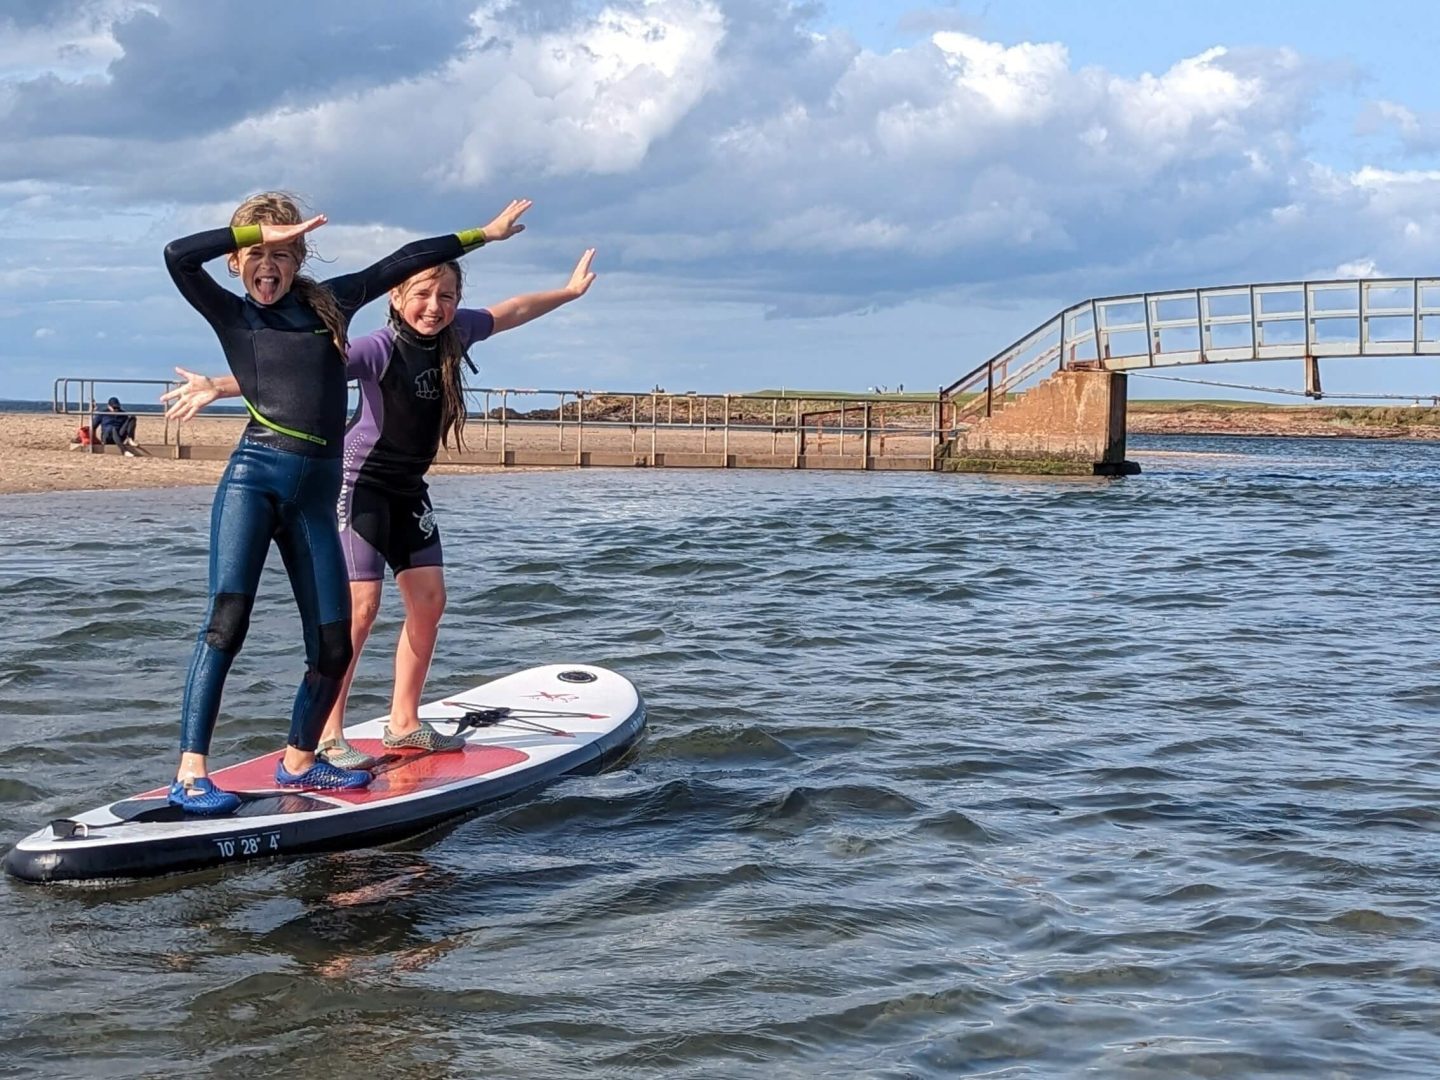 Two girls wearing wetsuits dancing on a paddleboard on the sea with a bridge and beach in the background